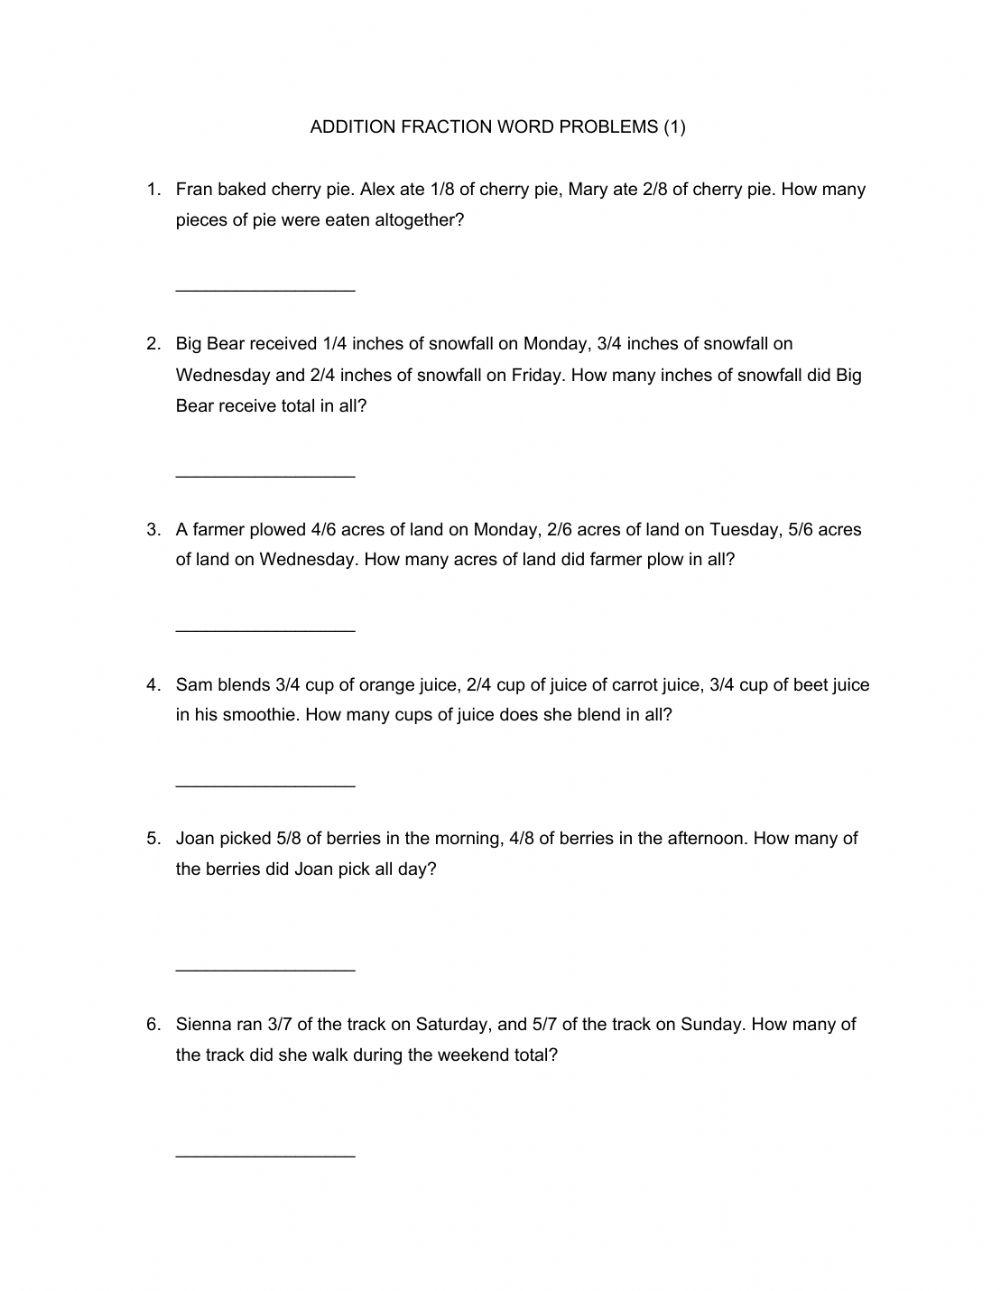 Fraction word problems (1)